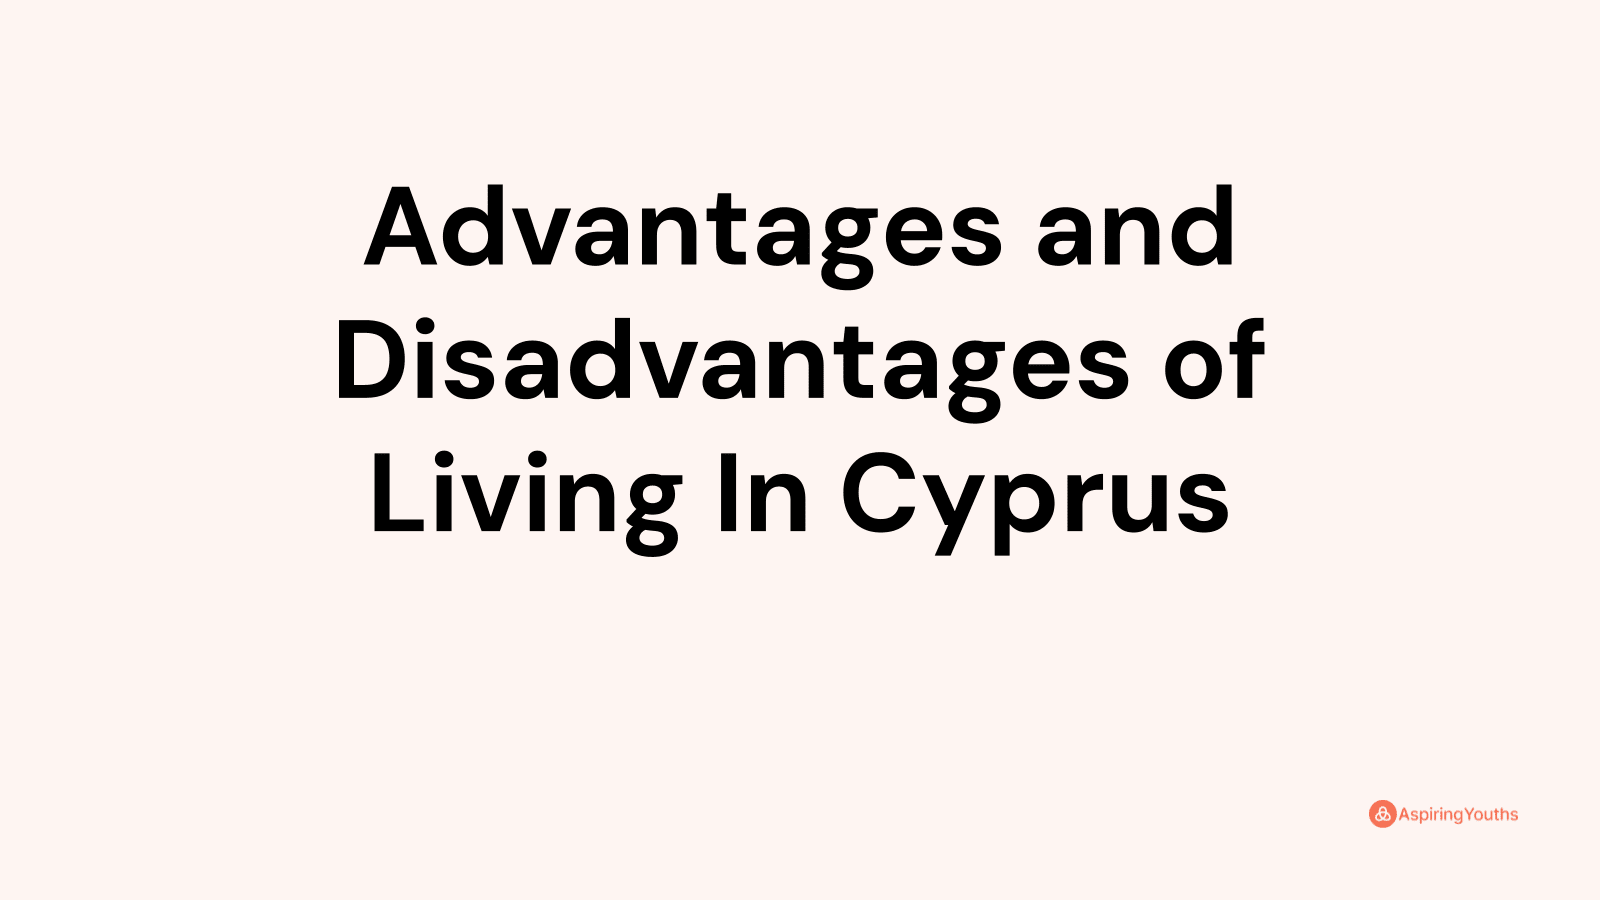 Advantages and disadvantages of Living In Cyprus